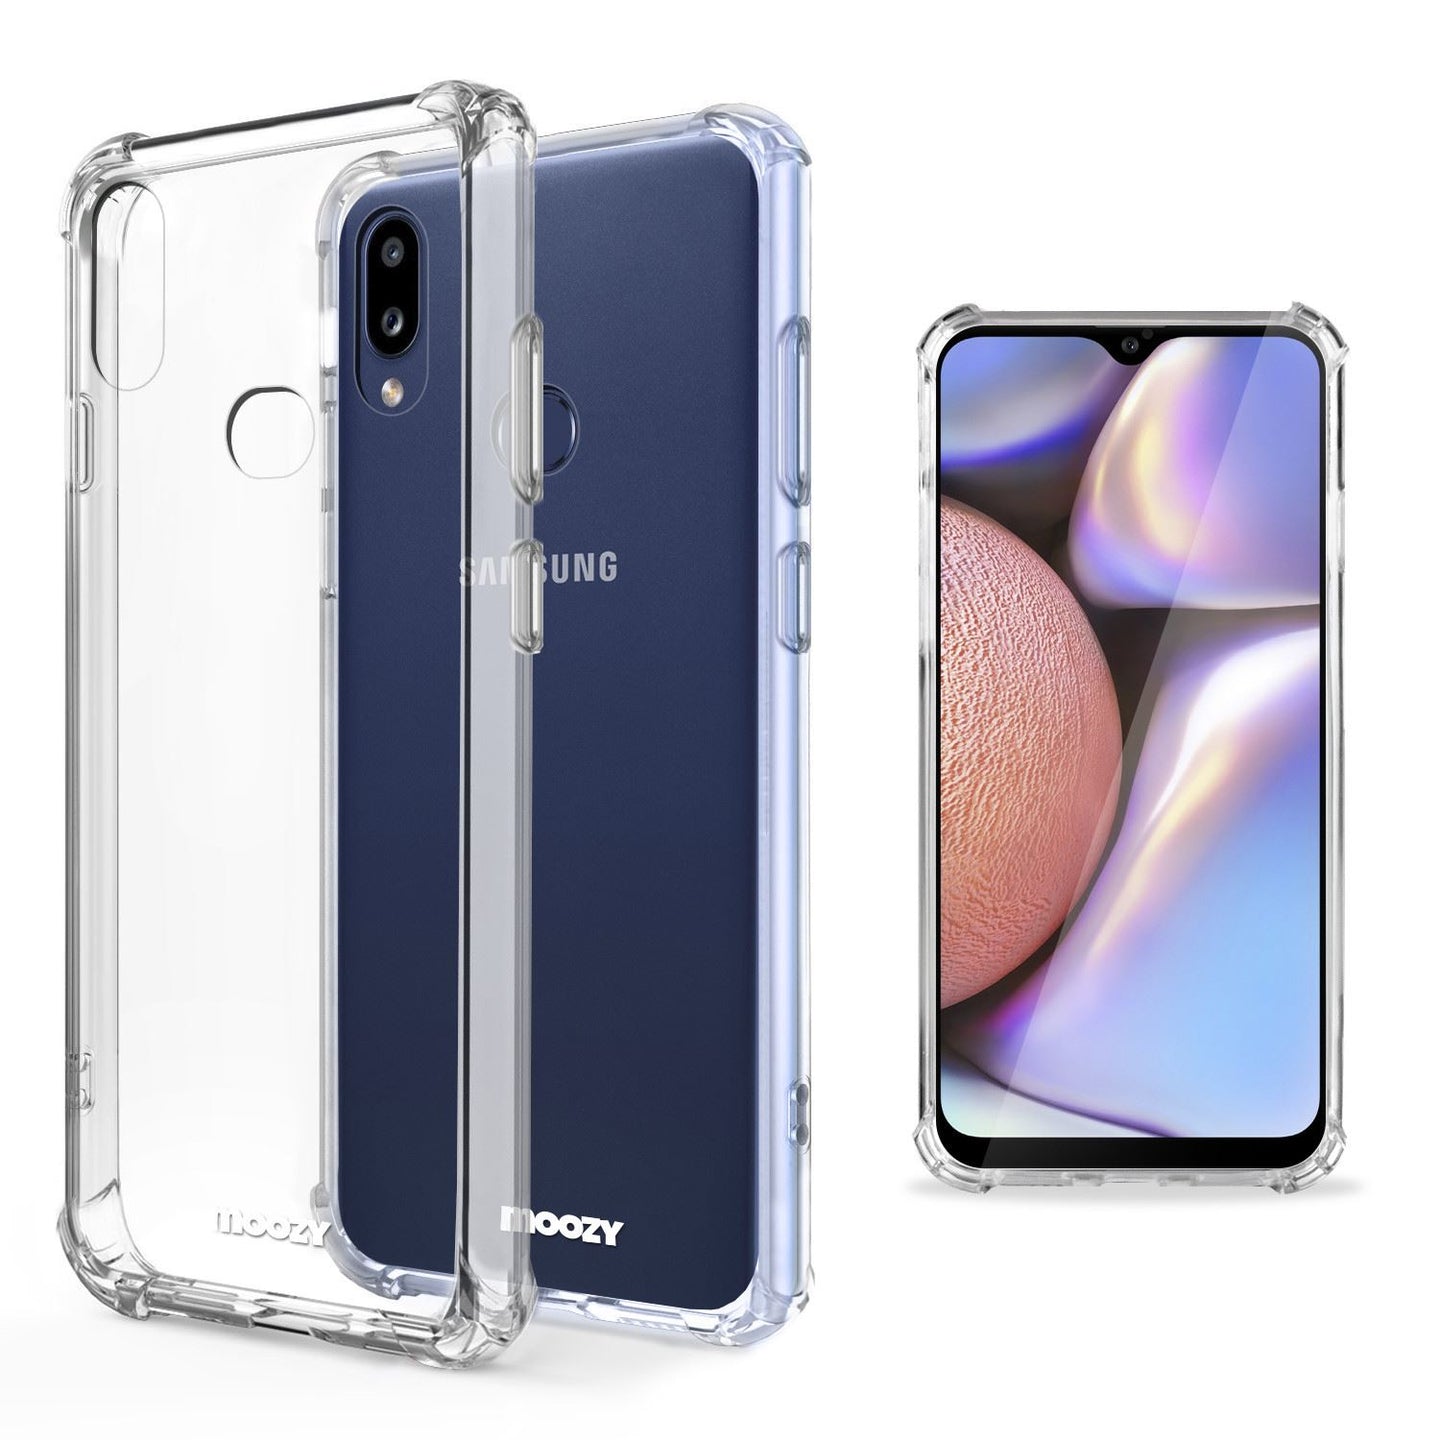 Moozy Shock Proof Silicone Case for Samsung A10s - Transparent Crystal Clear Phone Case Soft TPU Cover